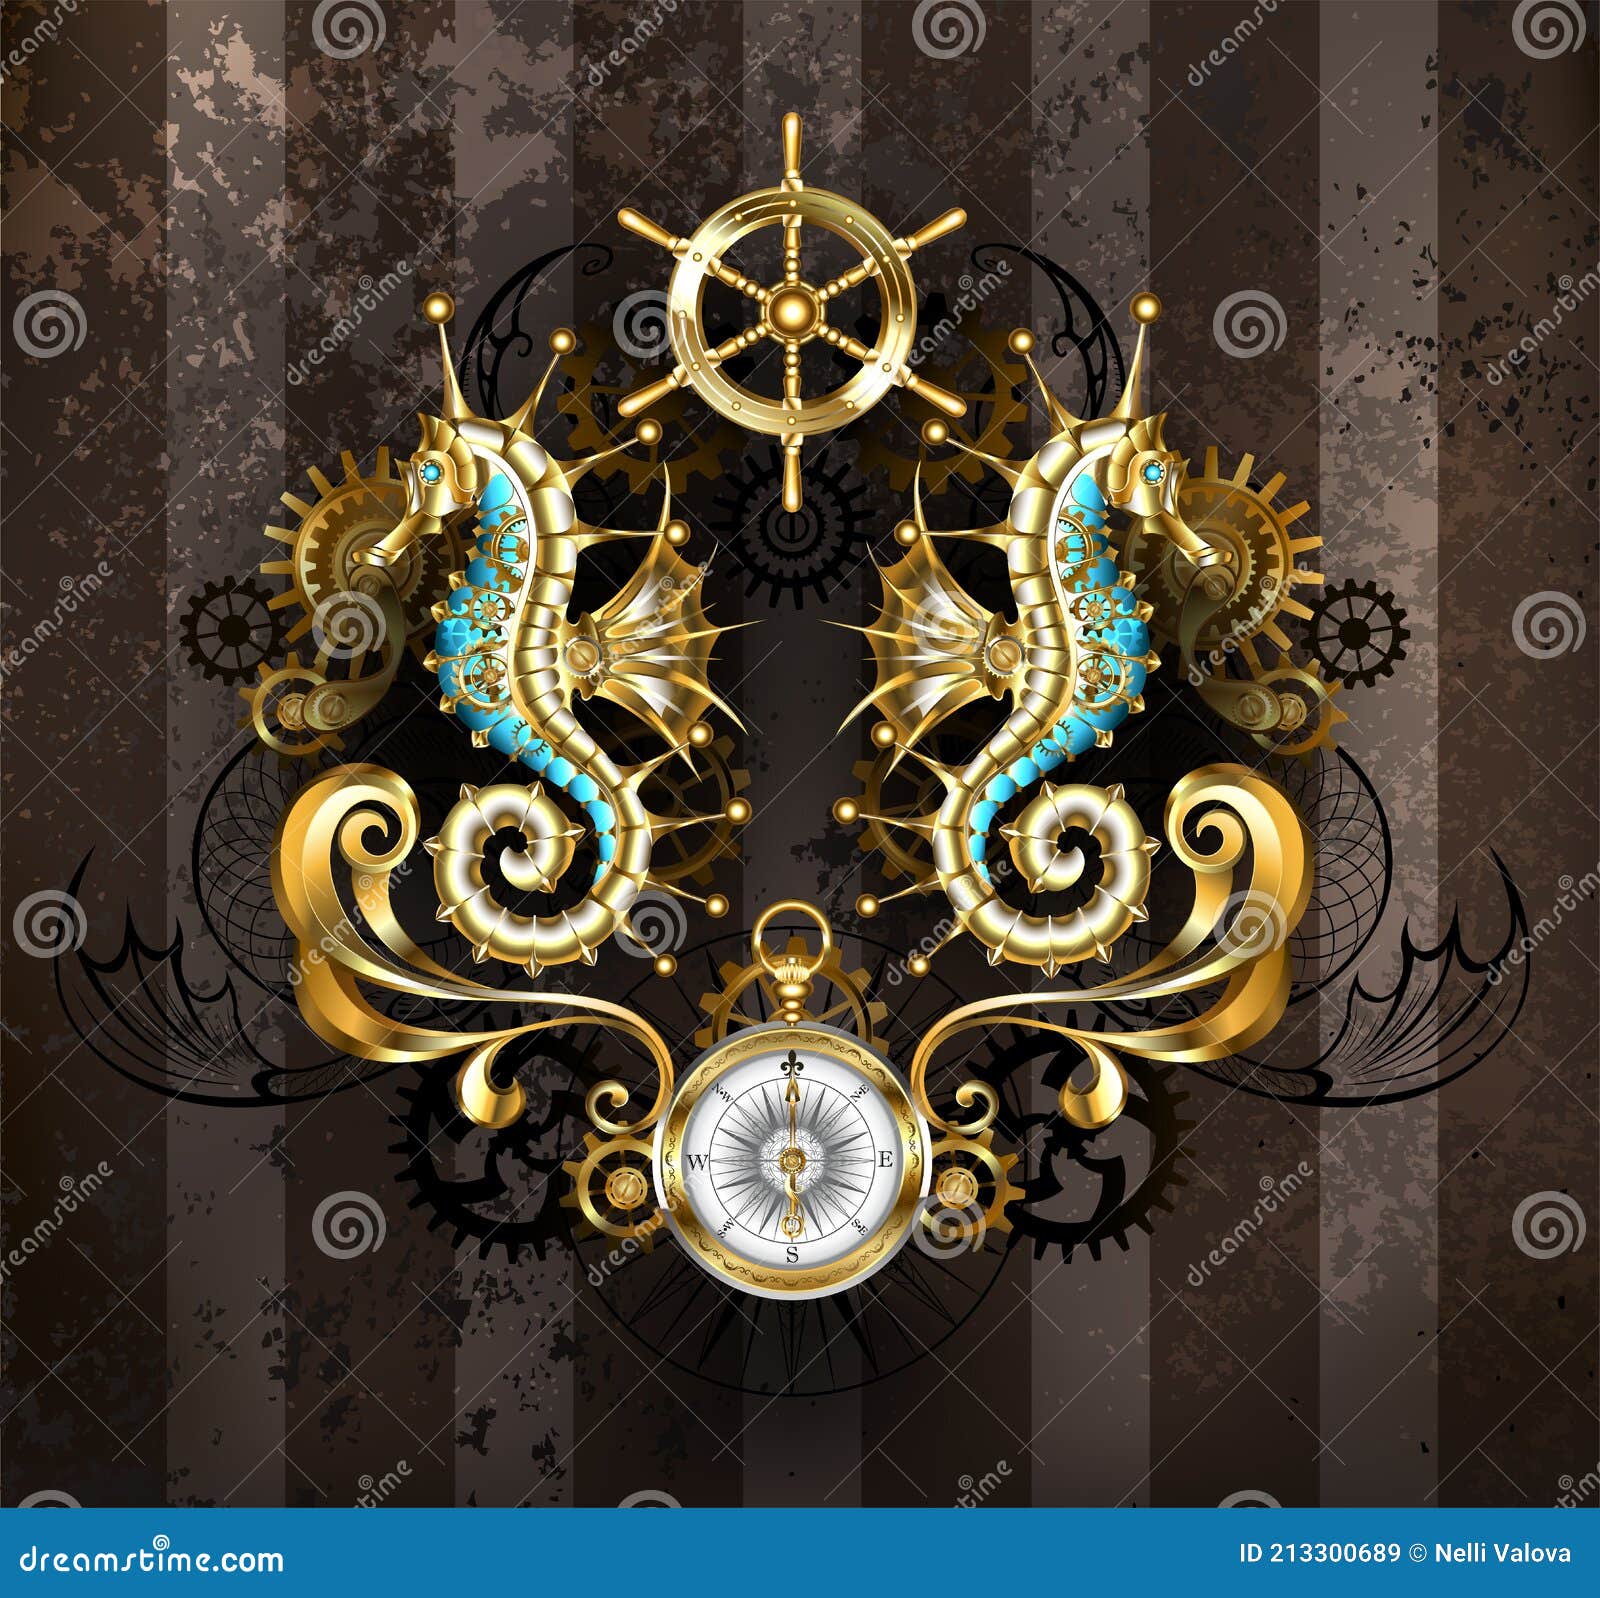 symmetrical composition with seahorse on brown background